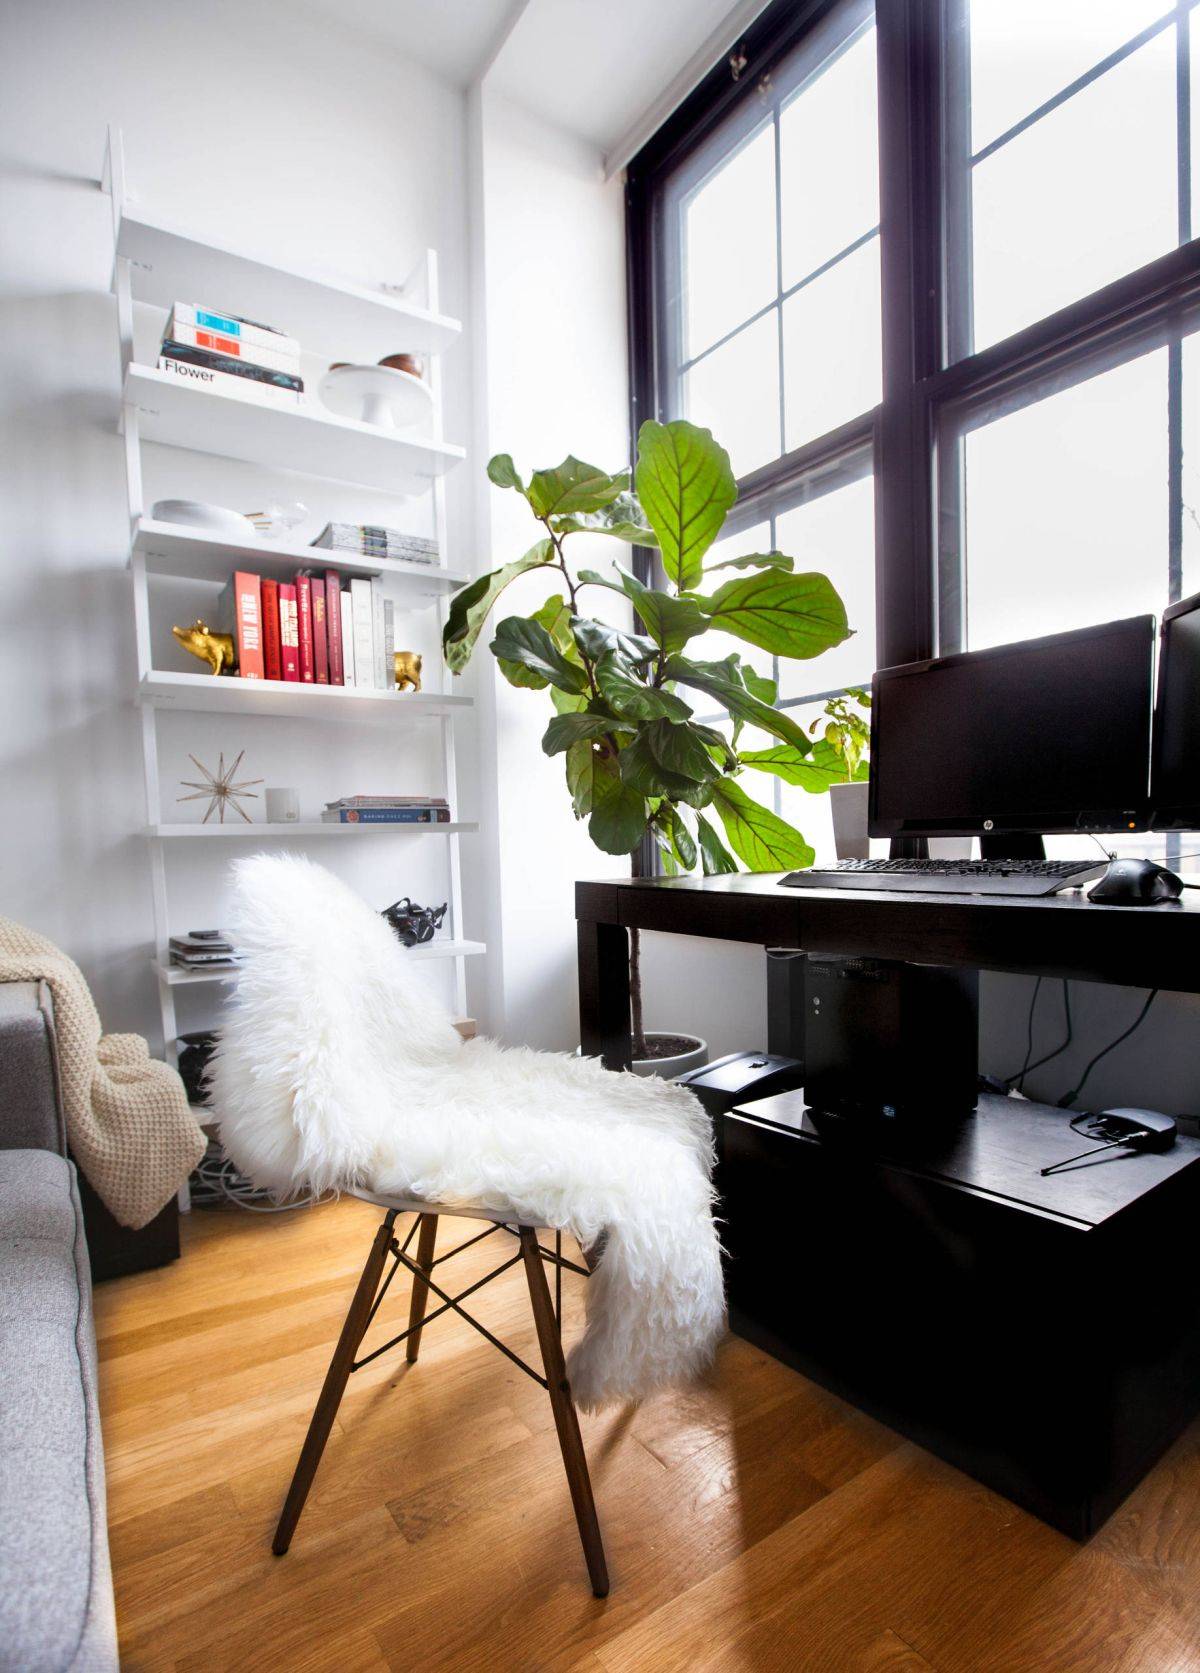 Add-a-bit-of-greenery-and-bring-some-natural-light-into-the-home-office-this-year-86565